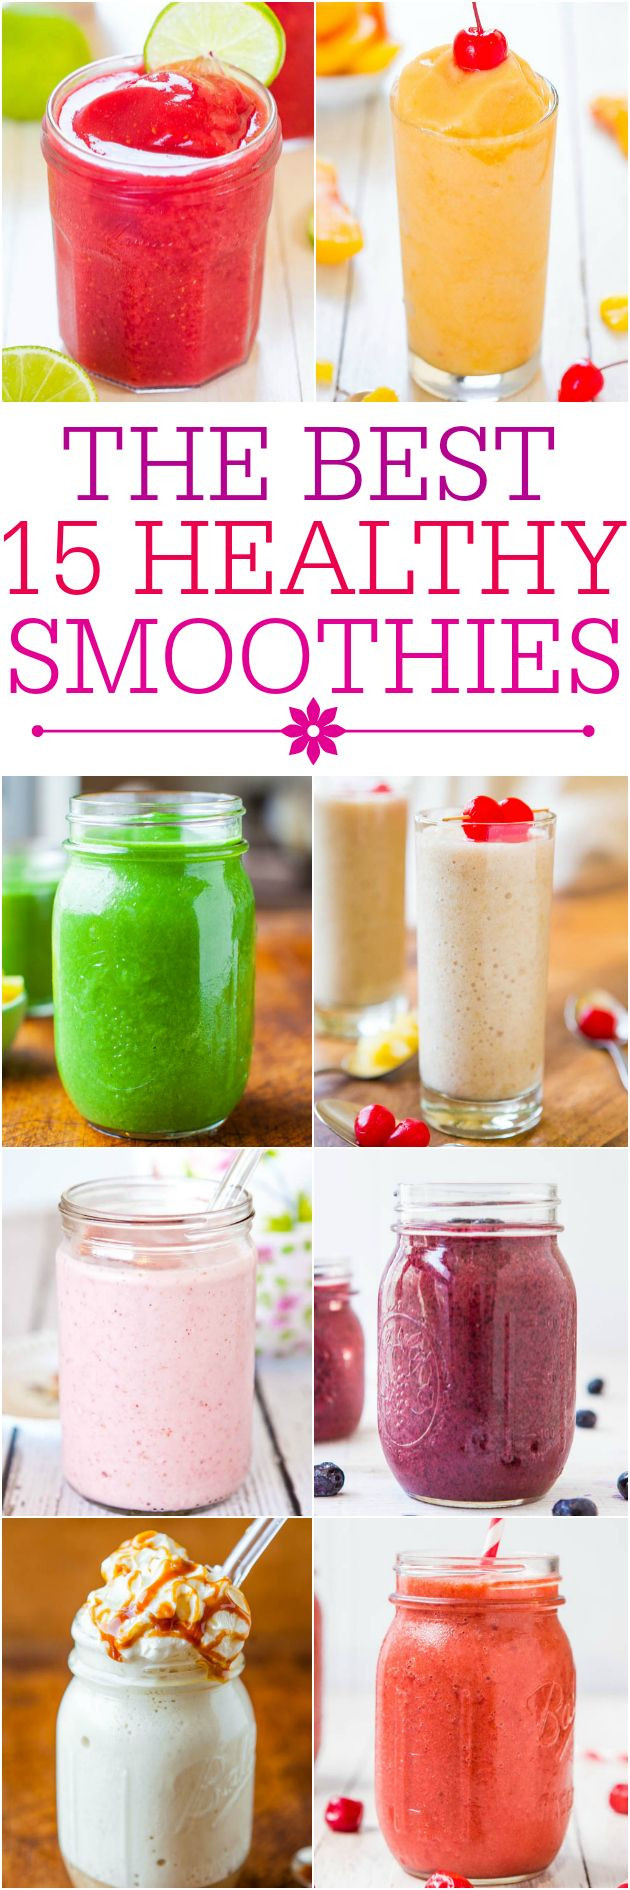 Quick Smoothie Recipes
 Recipe for smoothies ♥ Healthy smoothie drinks – Weight